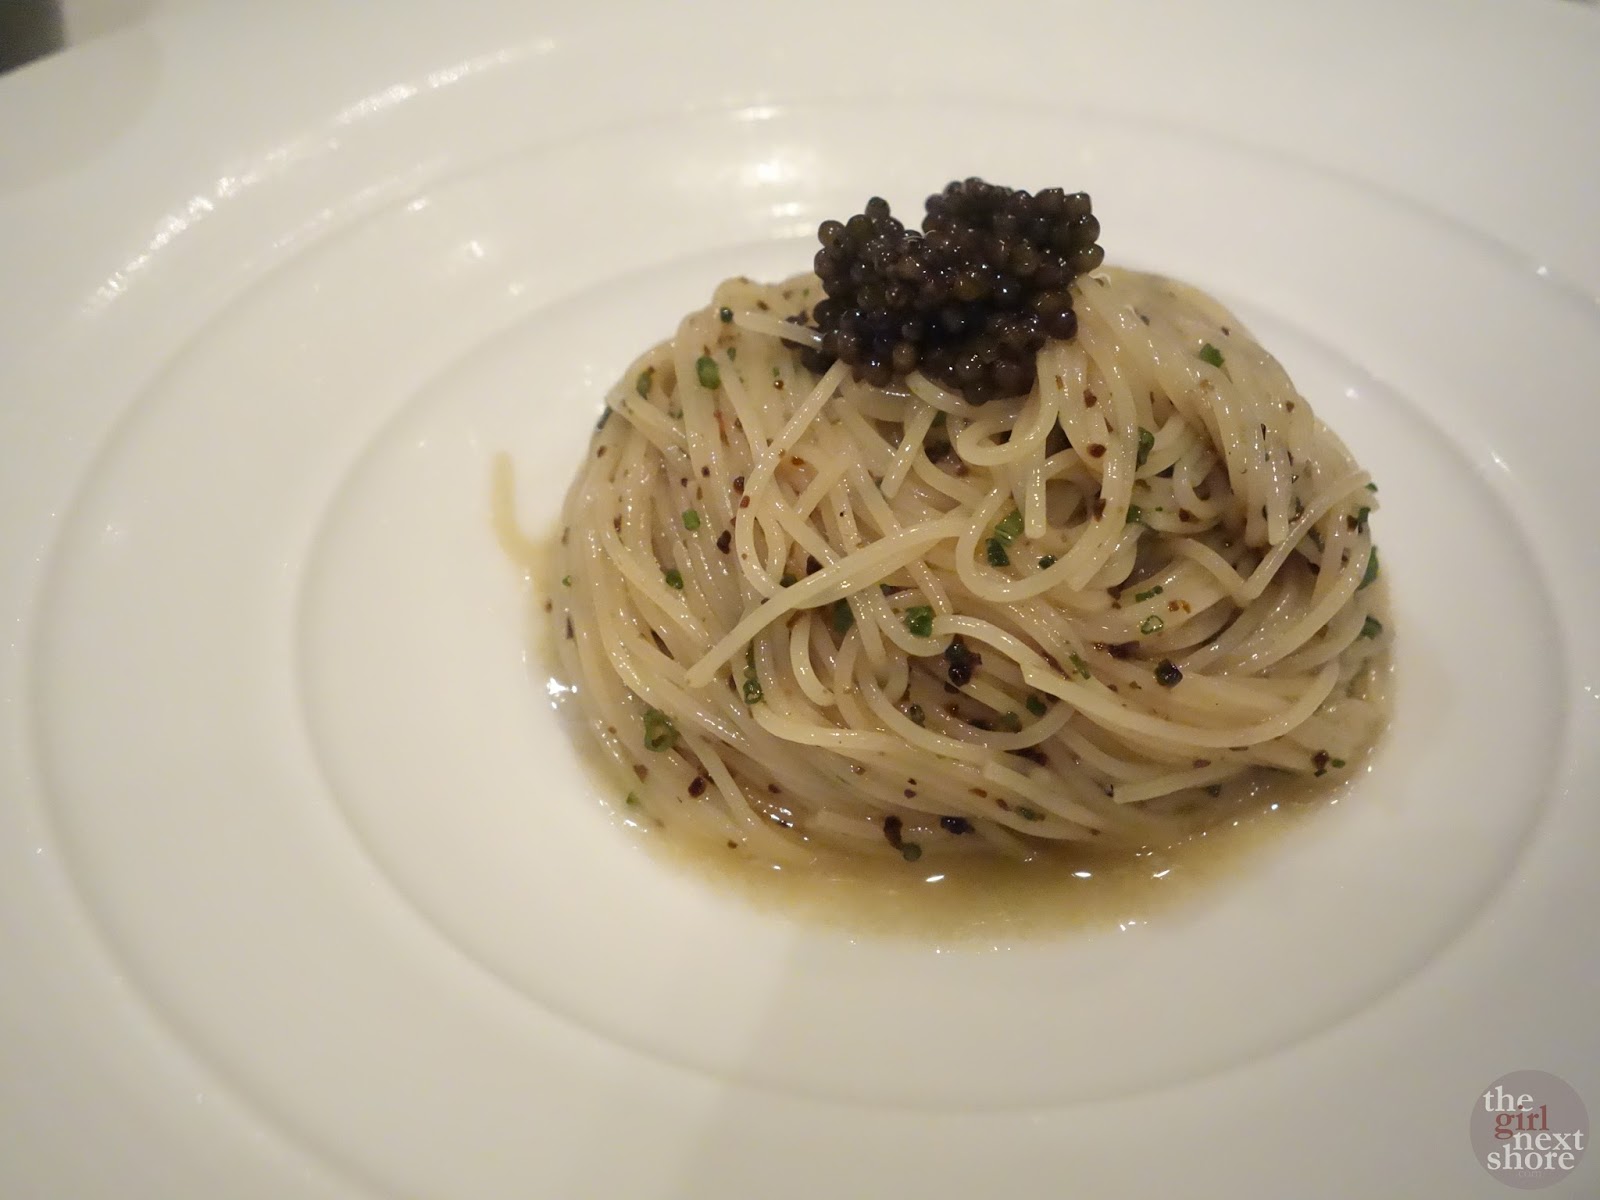 Cold Angel Hair Pasta with Caviar at Gunther's Modern French Cuisine Singapore